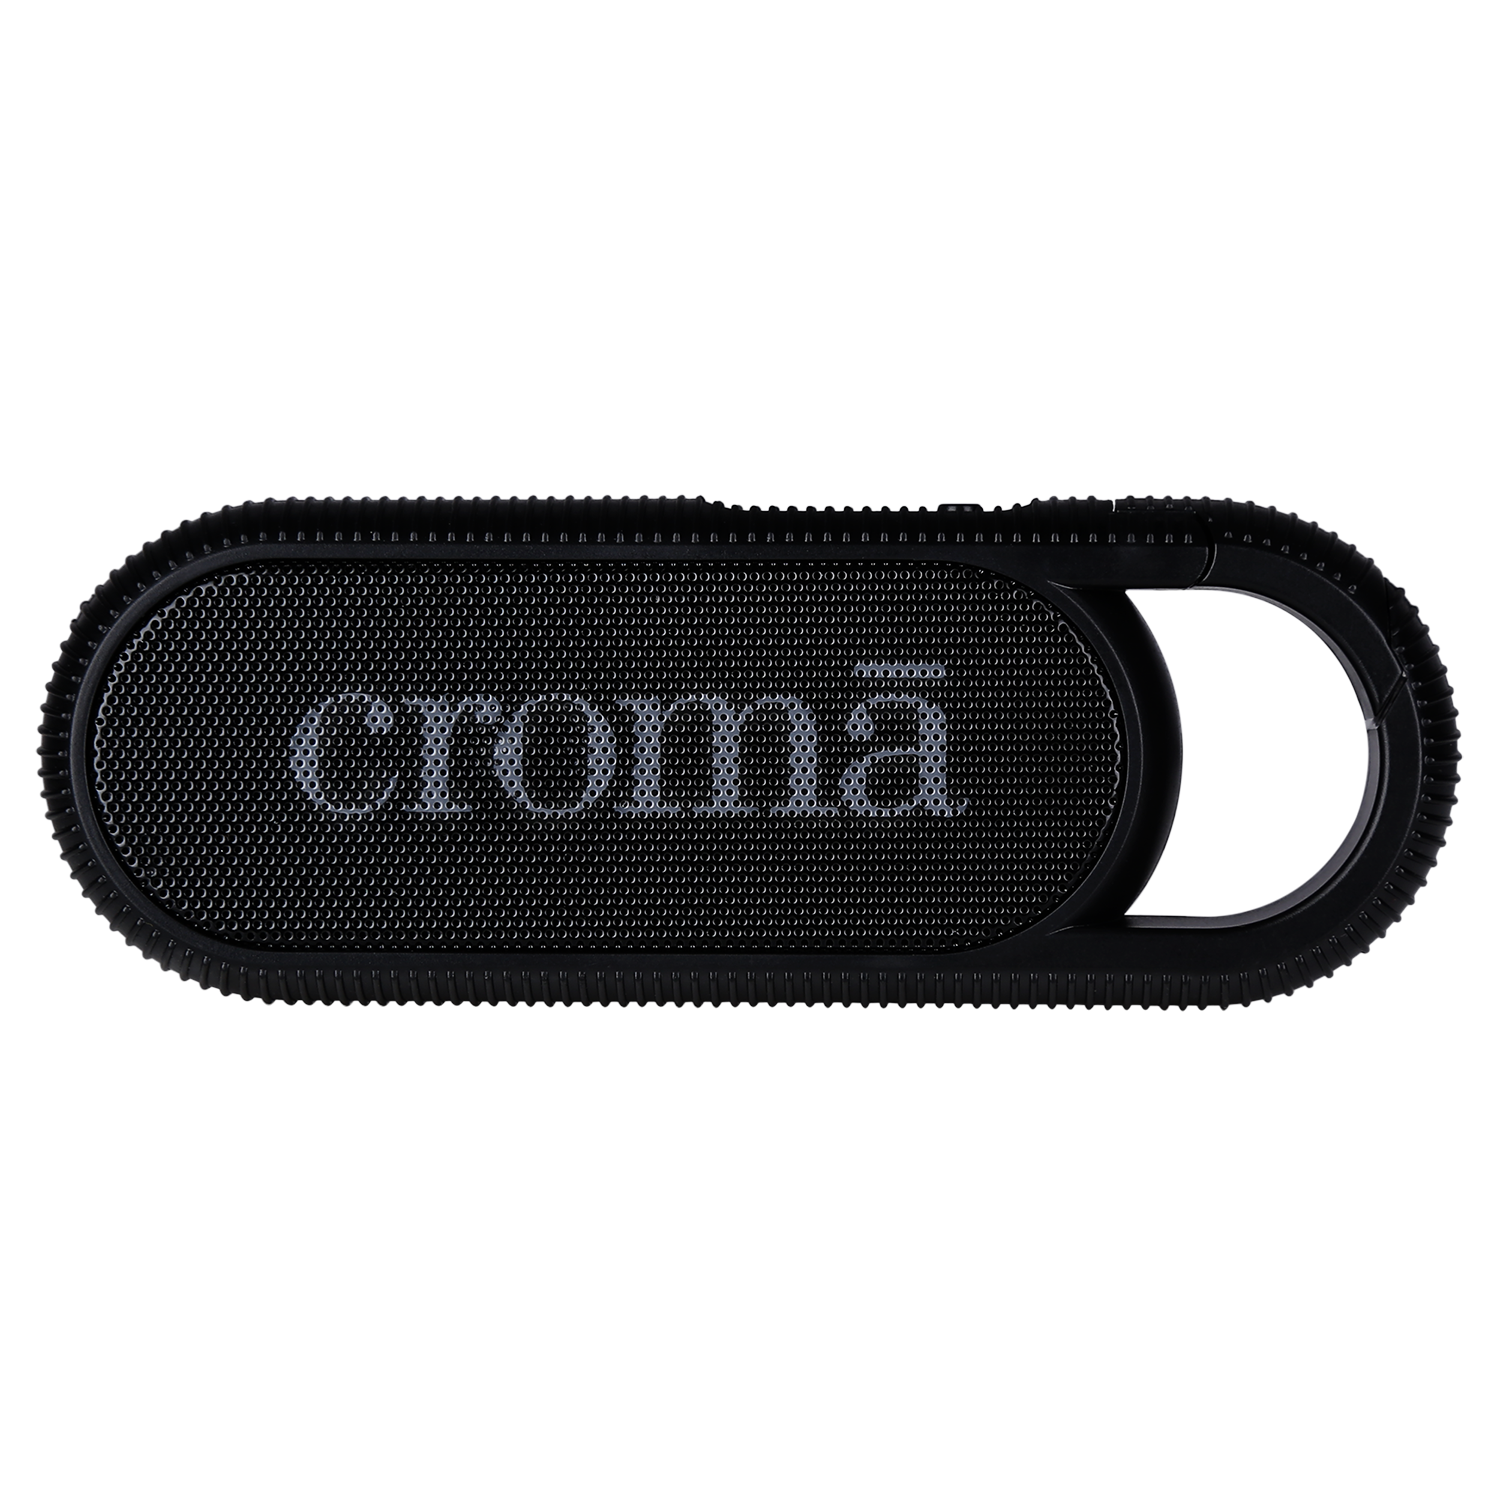 Croma 2W Portable Bluetooth Speaker (With Hook, Mono Channel, Black)_1